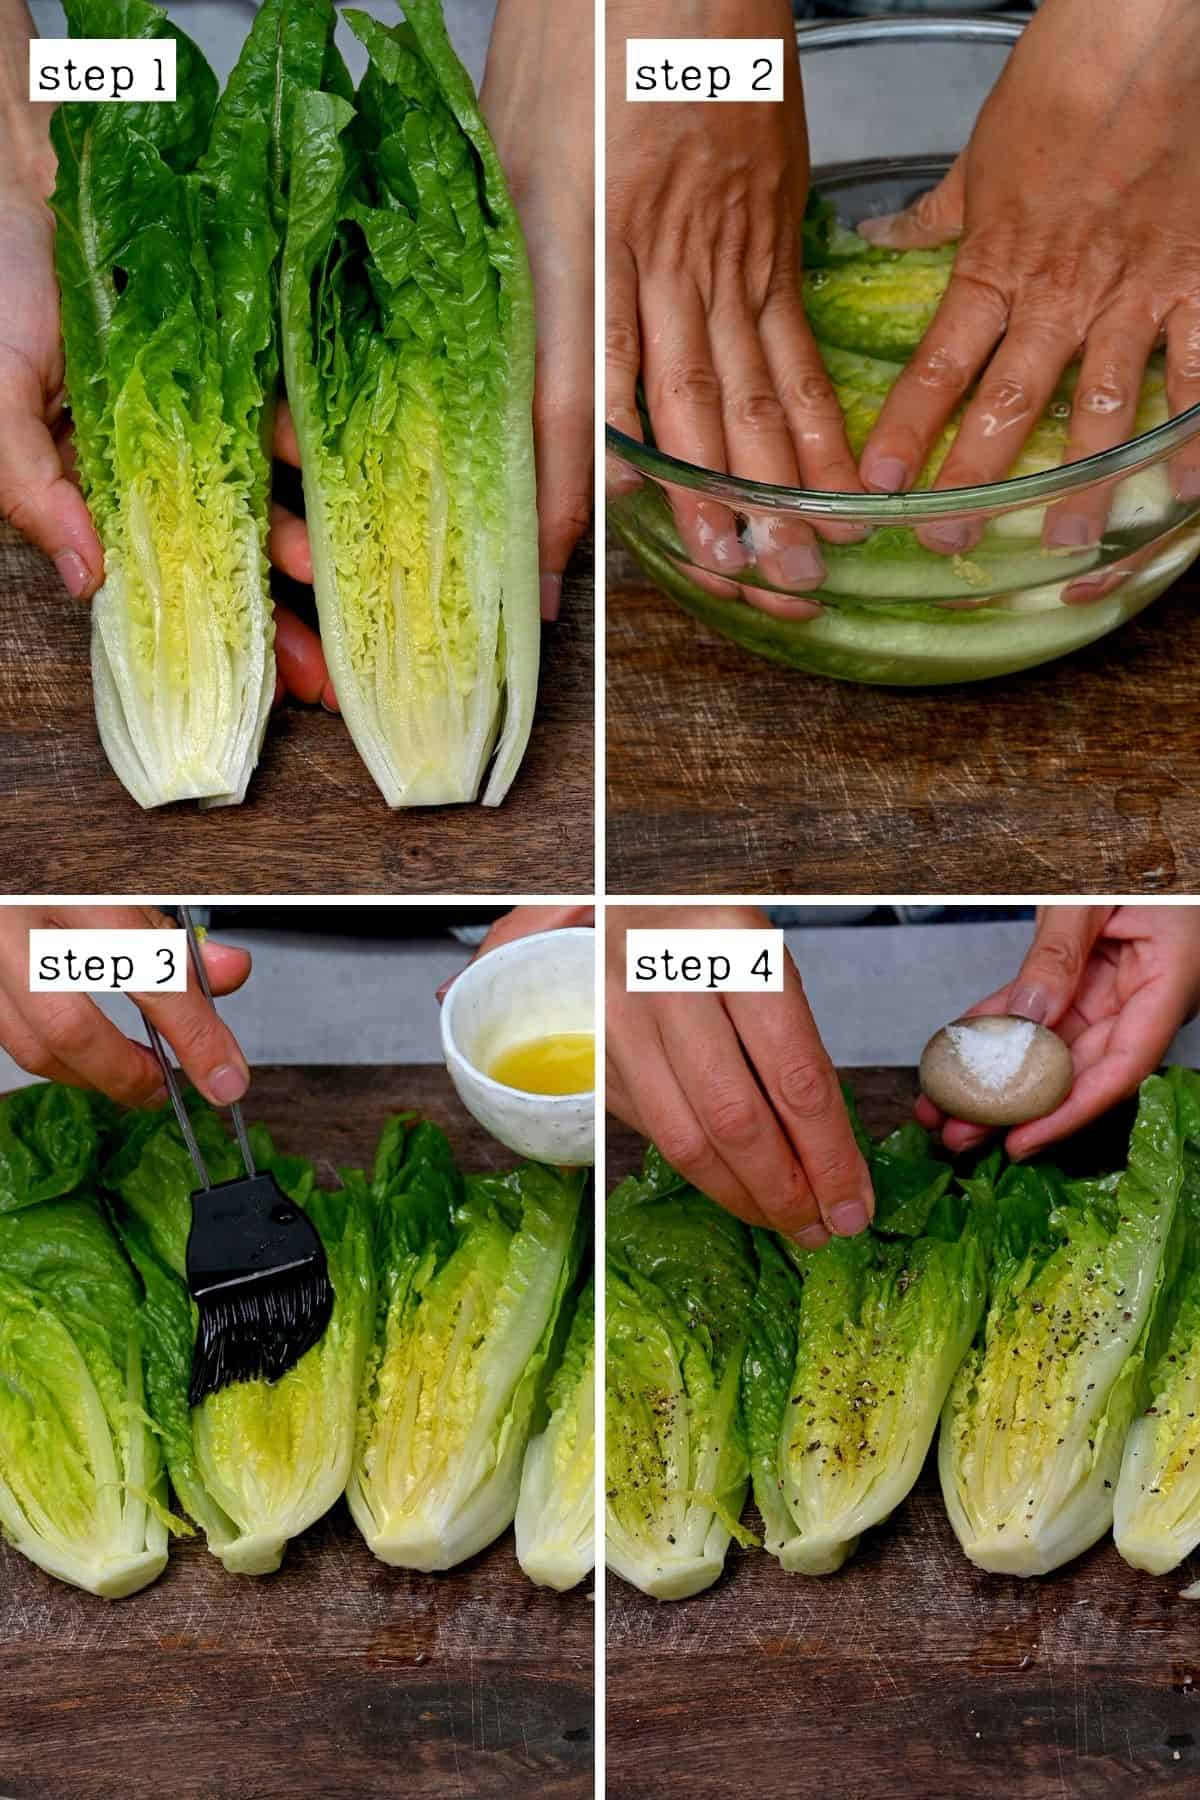 Steps for cleaning and seasoning lettuce